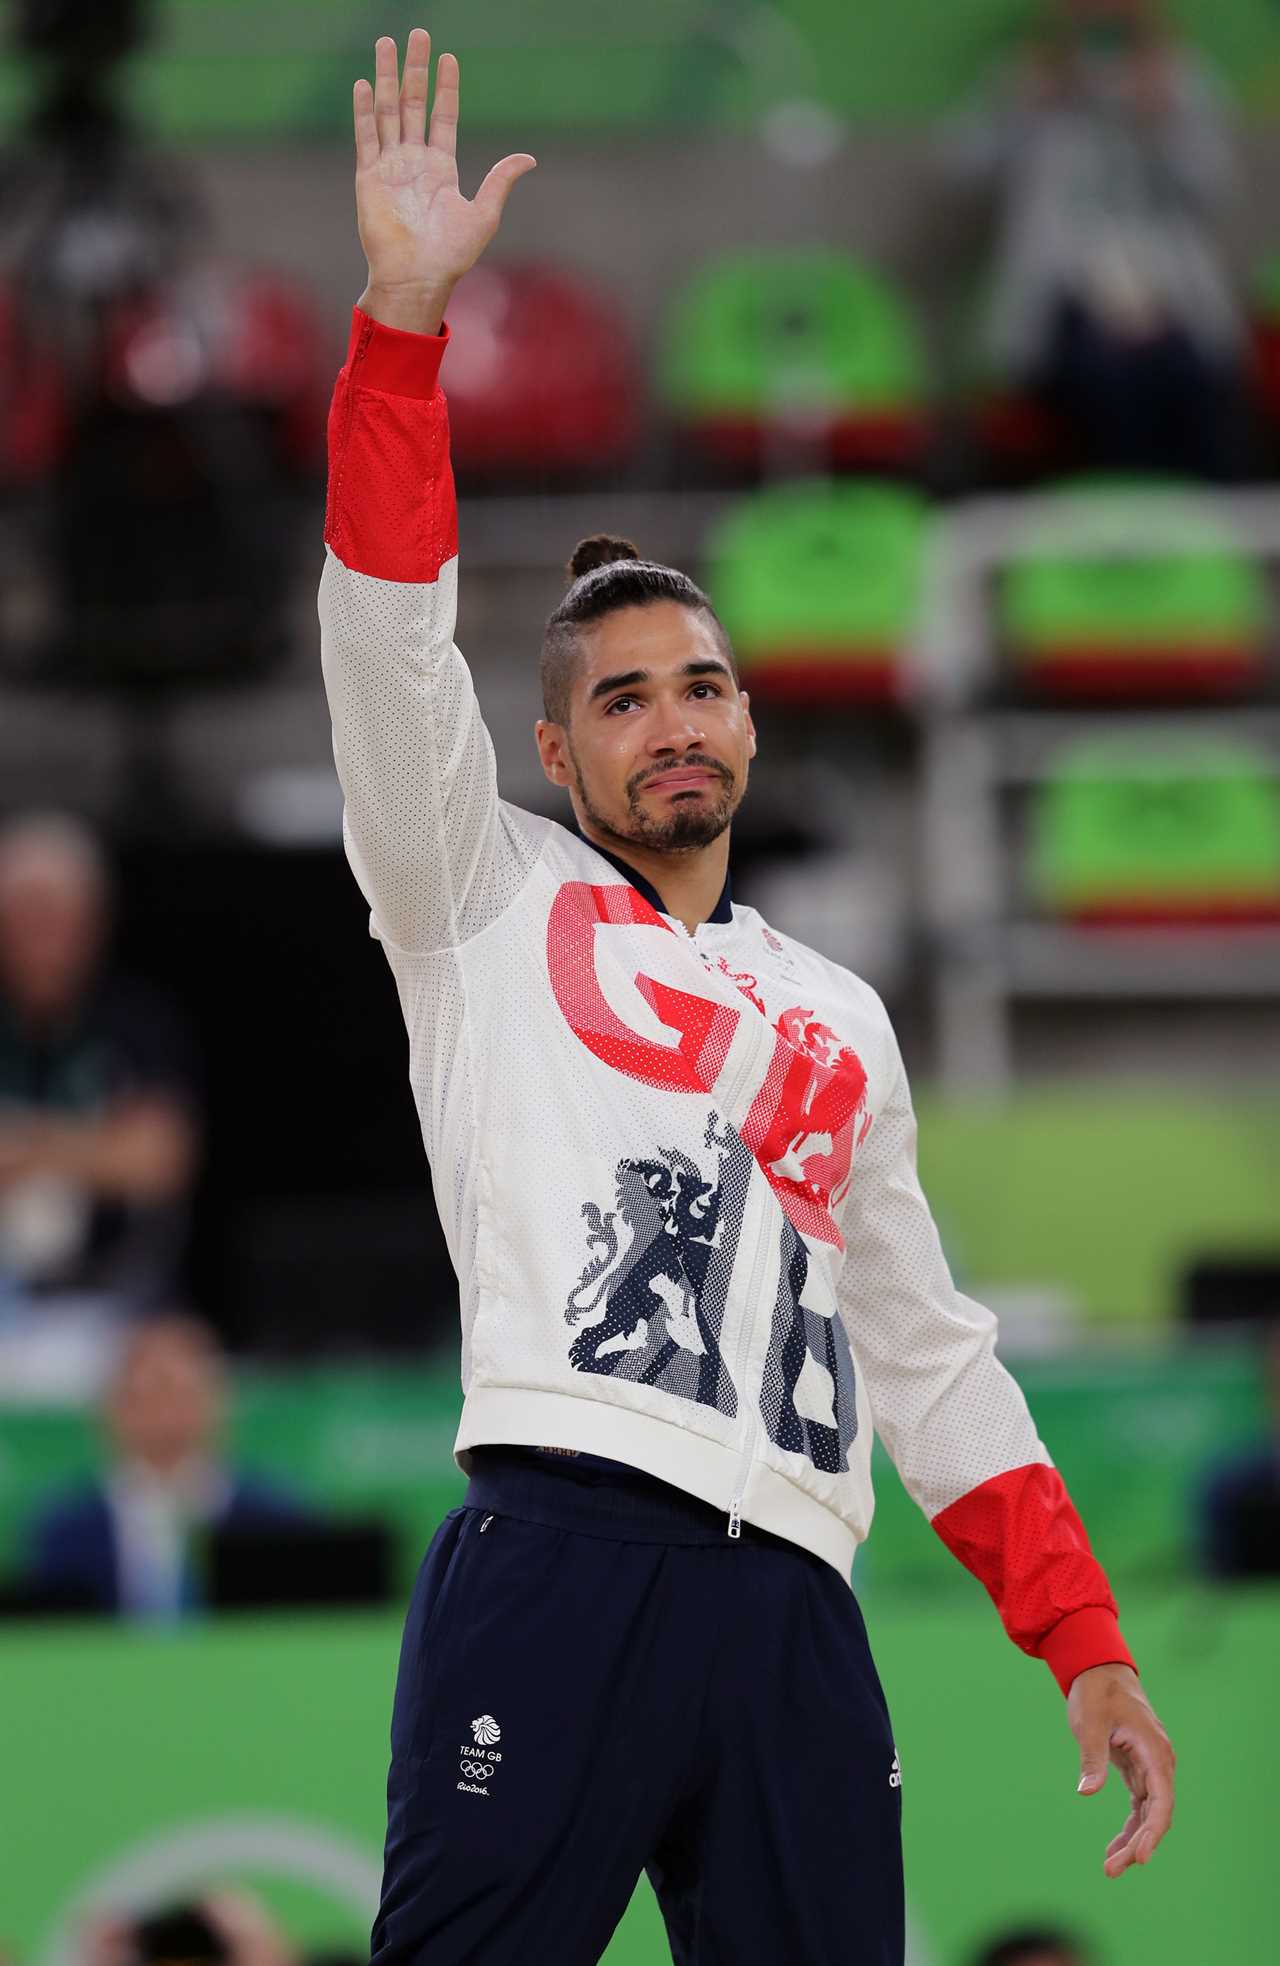 Strictly winner Louis Smith launches very different career 11 years after winning show